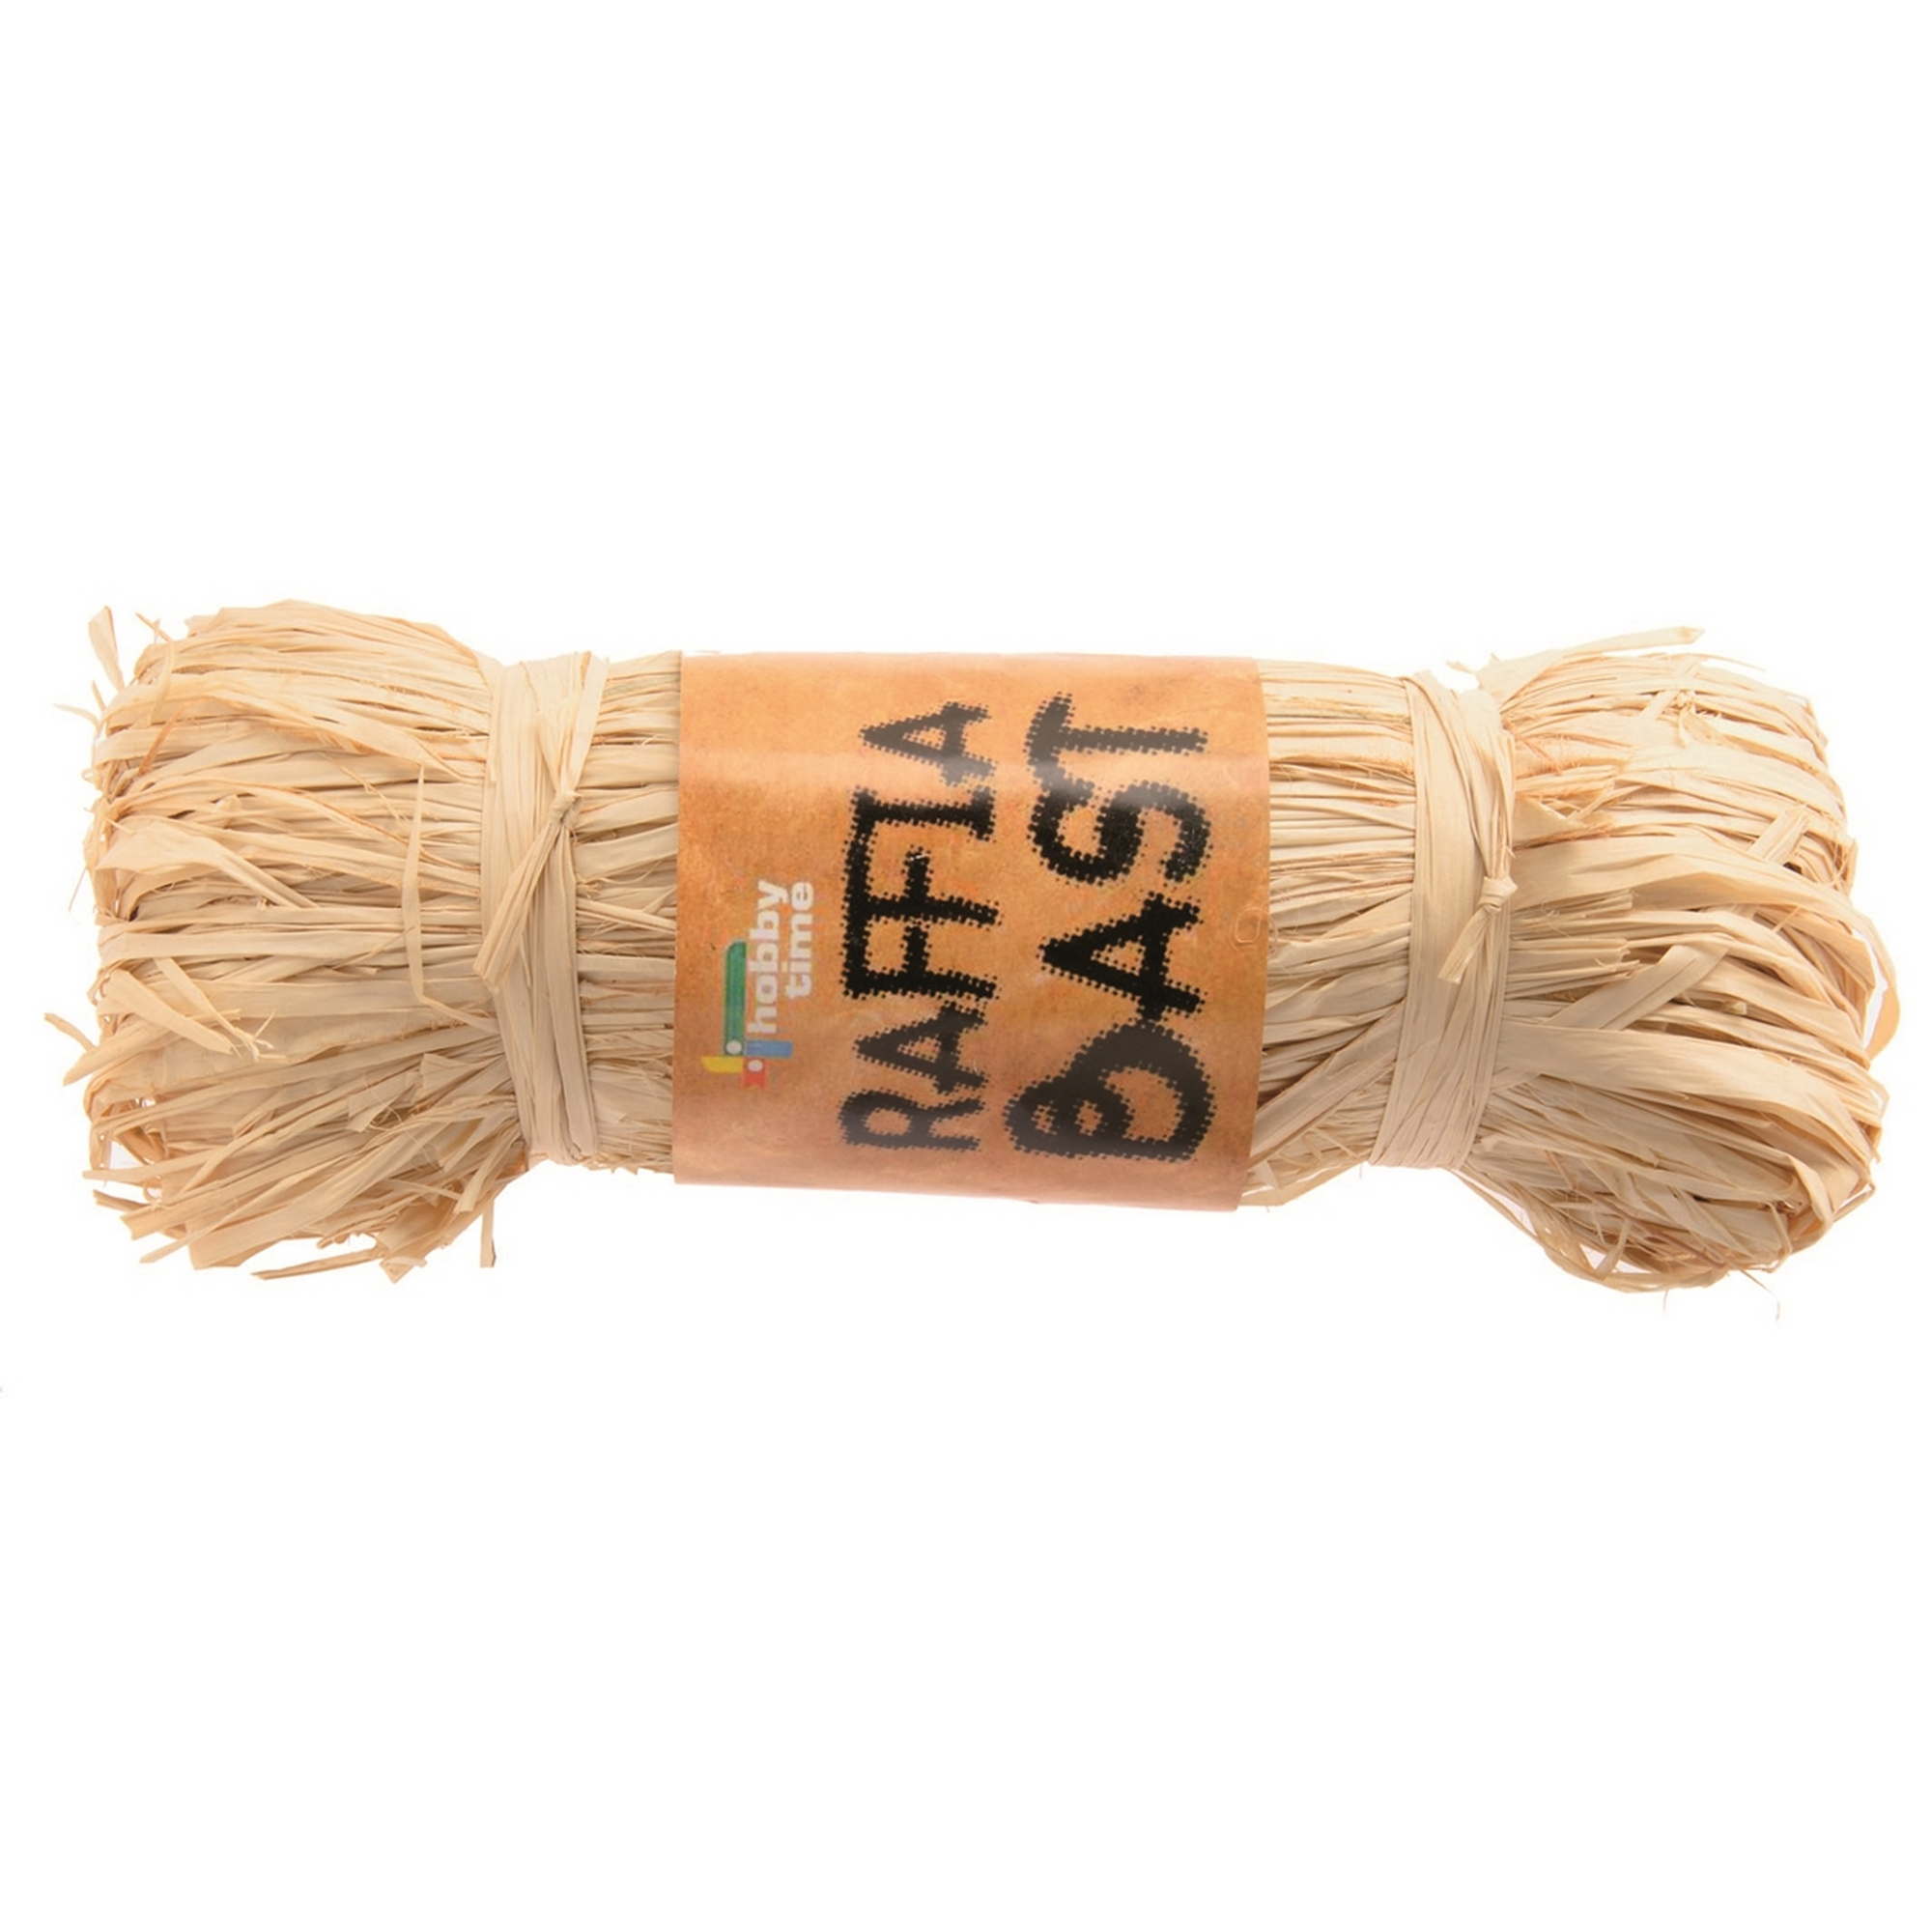 Raffiabast beige 150 g + product picture